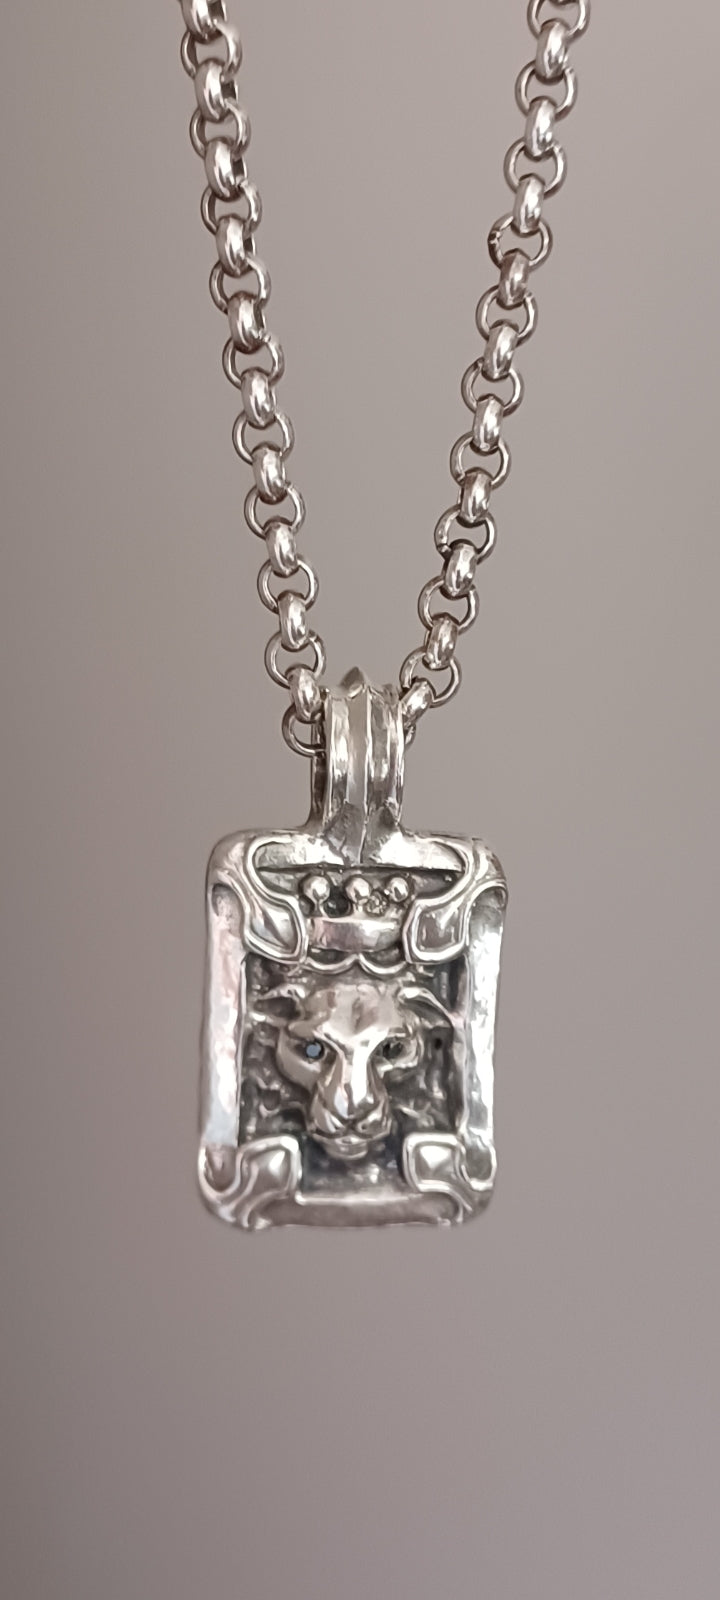 Necklace - Lion King with Black Diamond Eyes